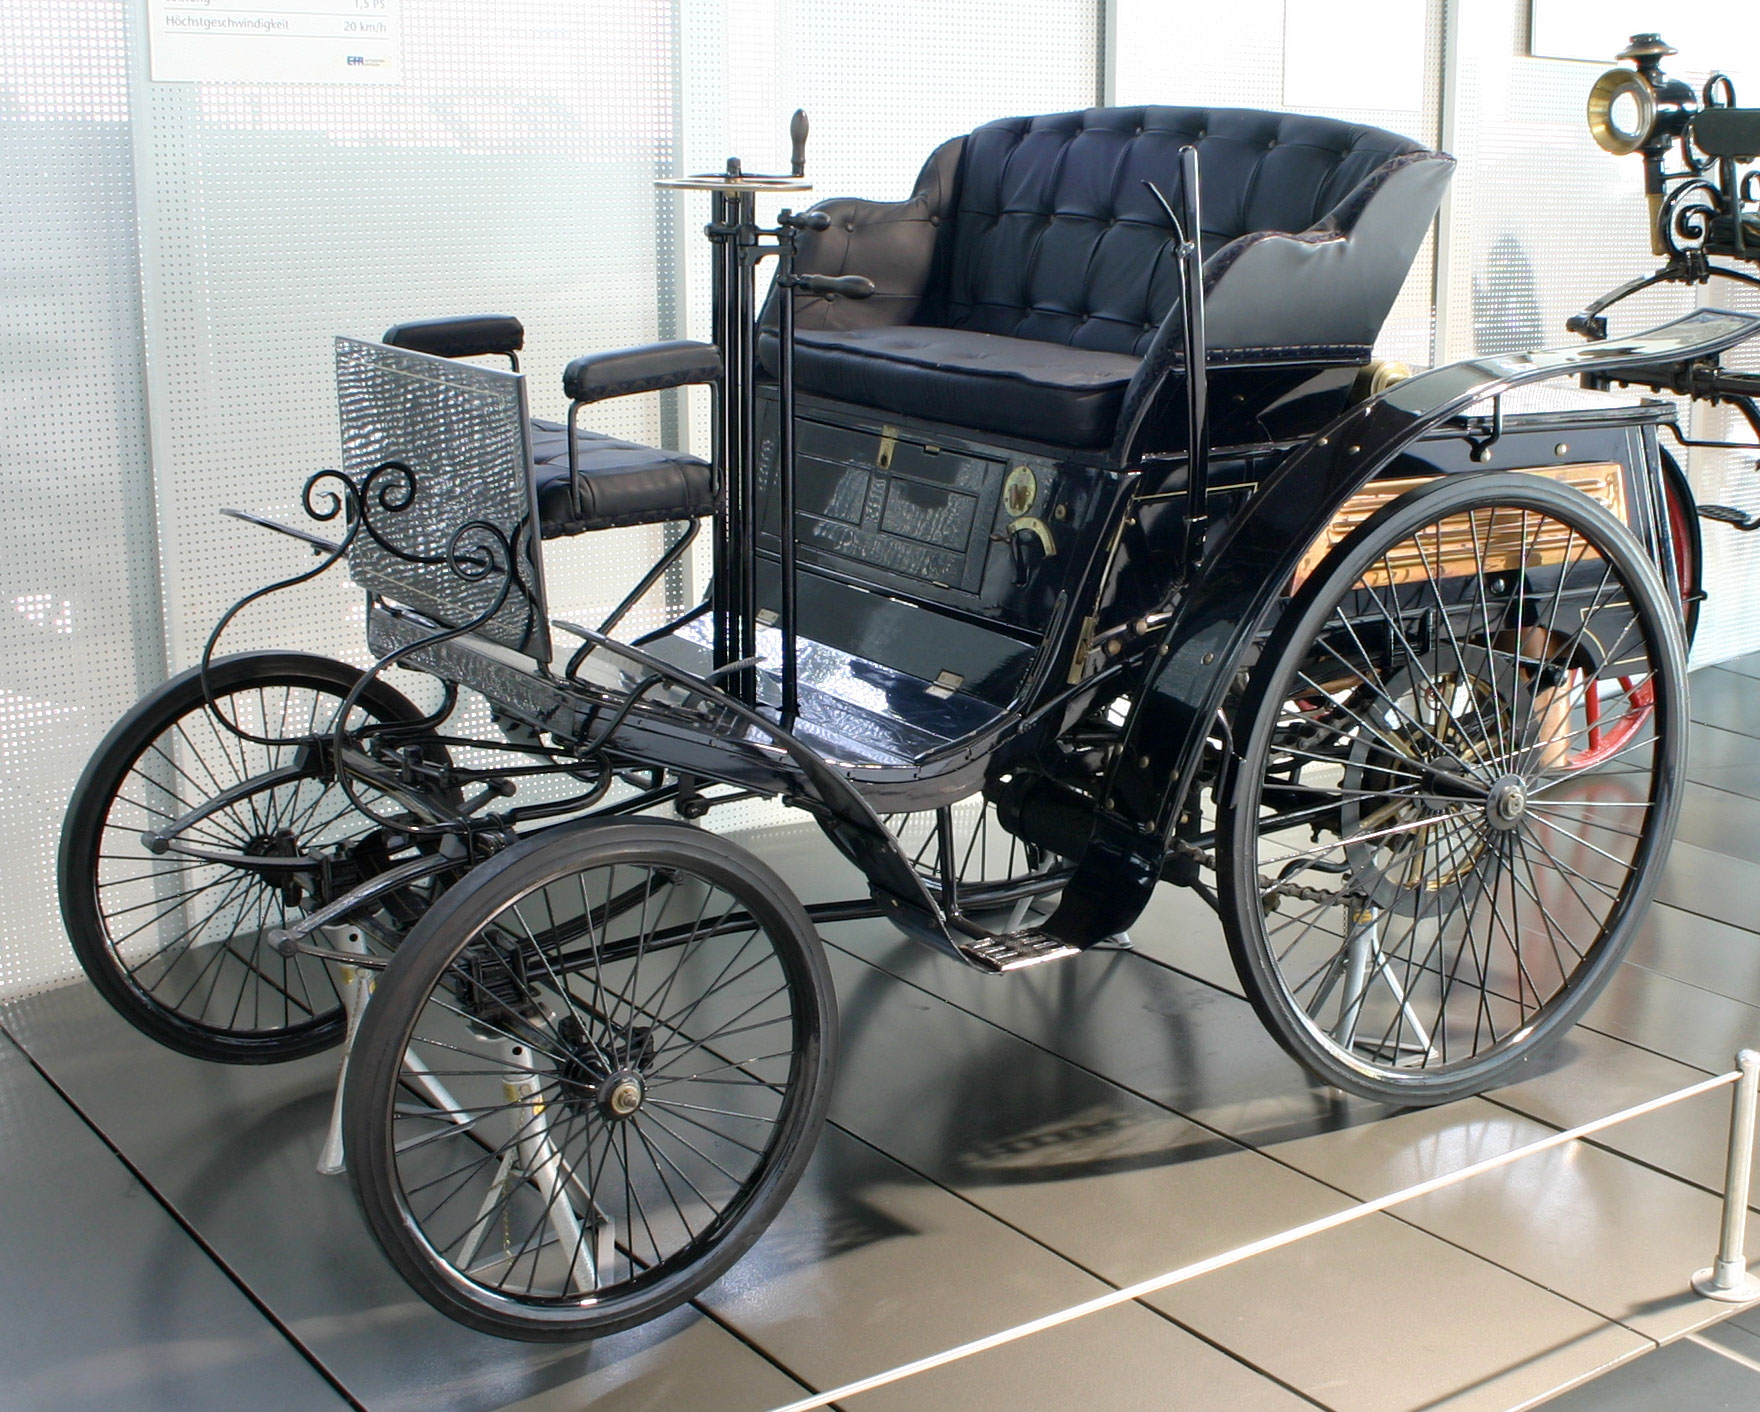 Who invented the first car karl benz or henry ford #2